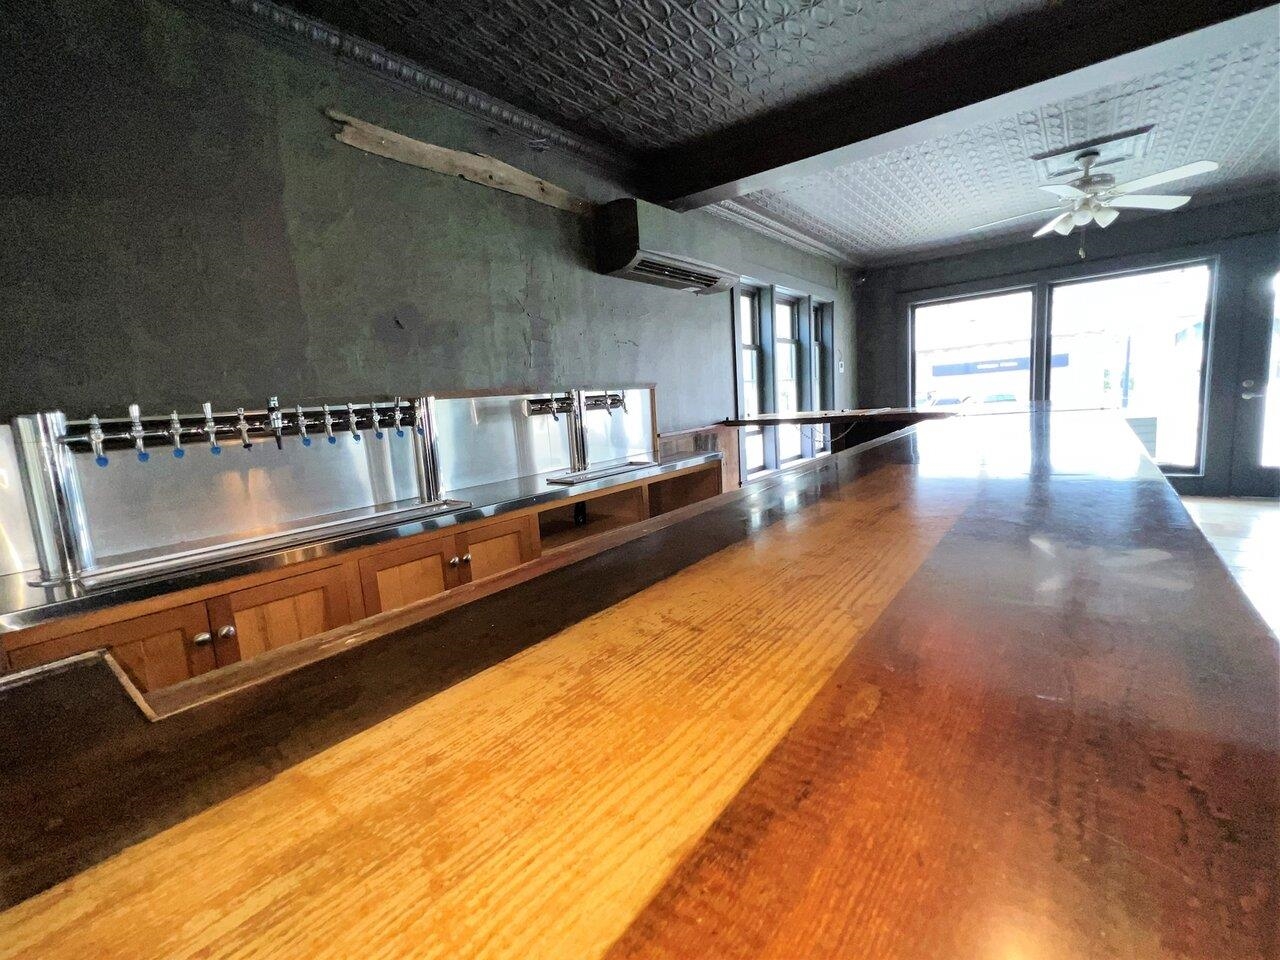 Full bar with 16 taps